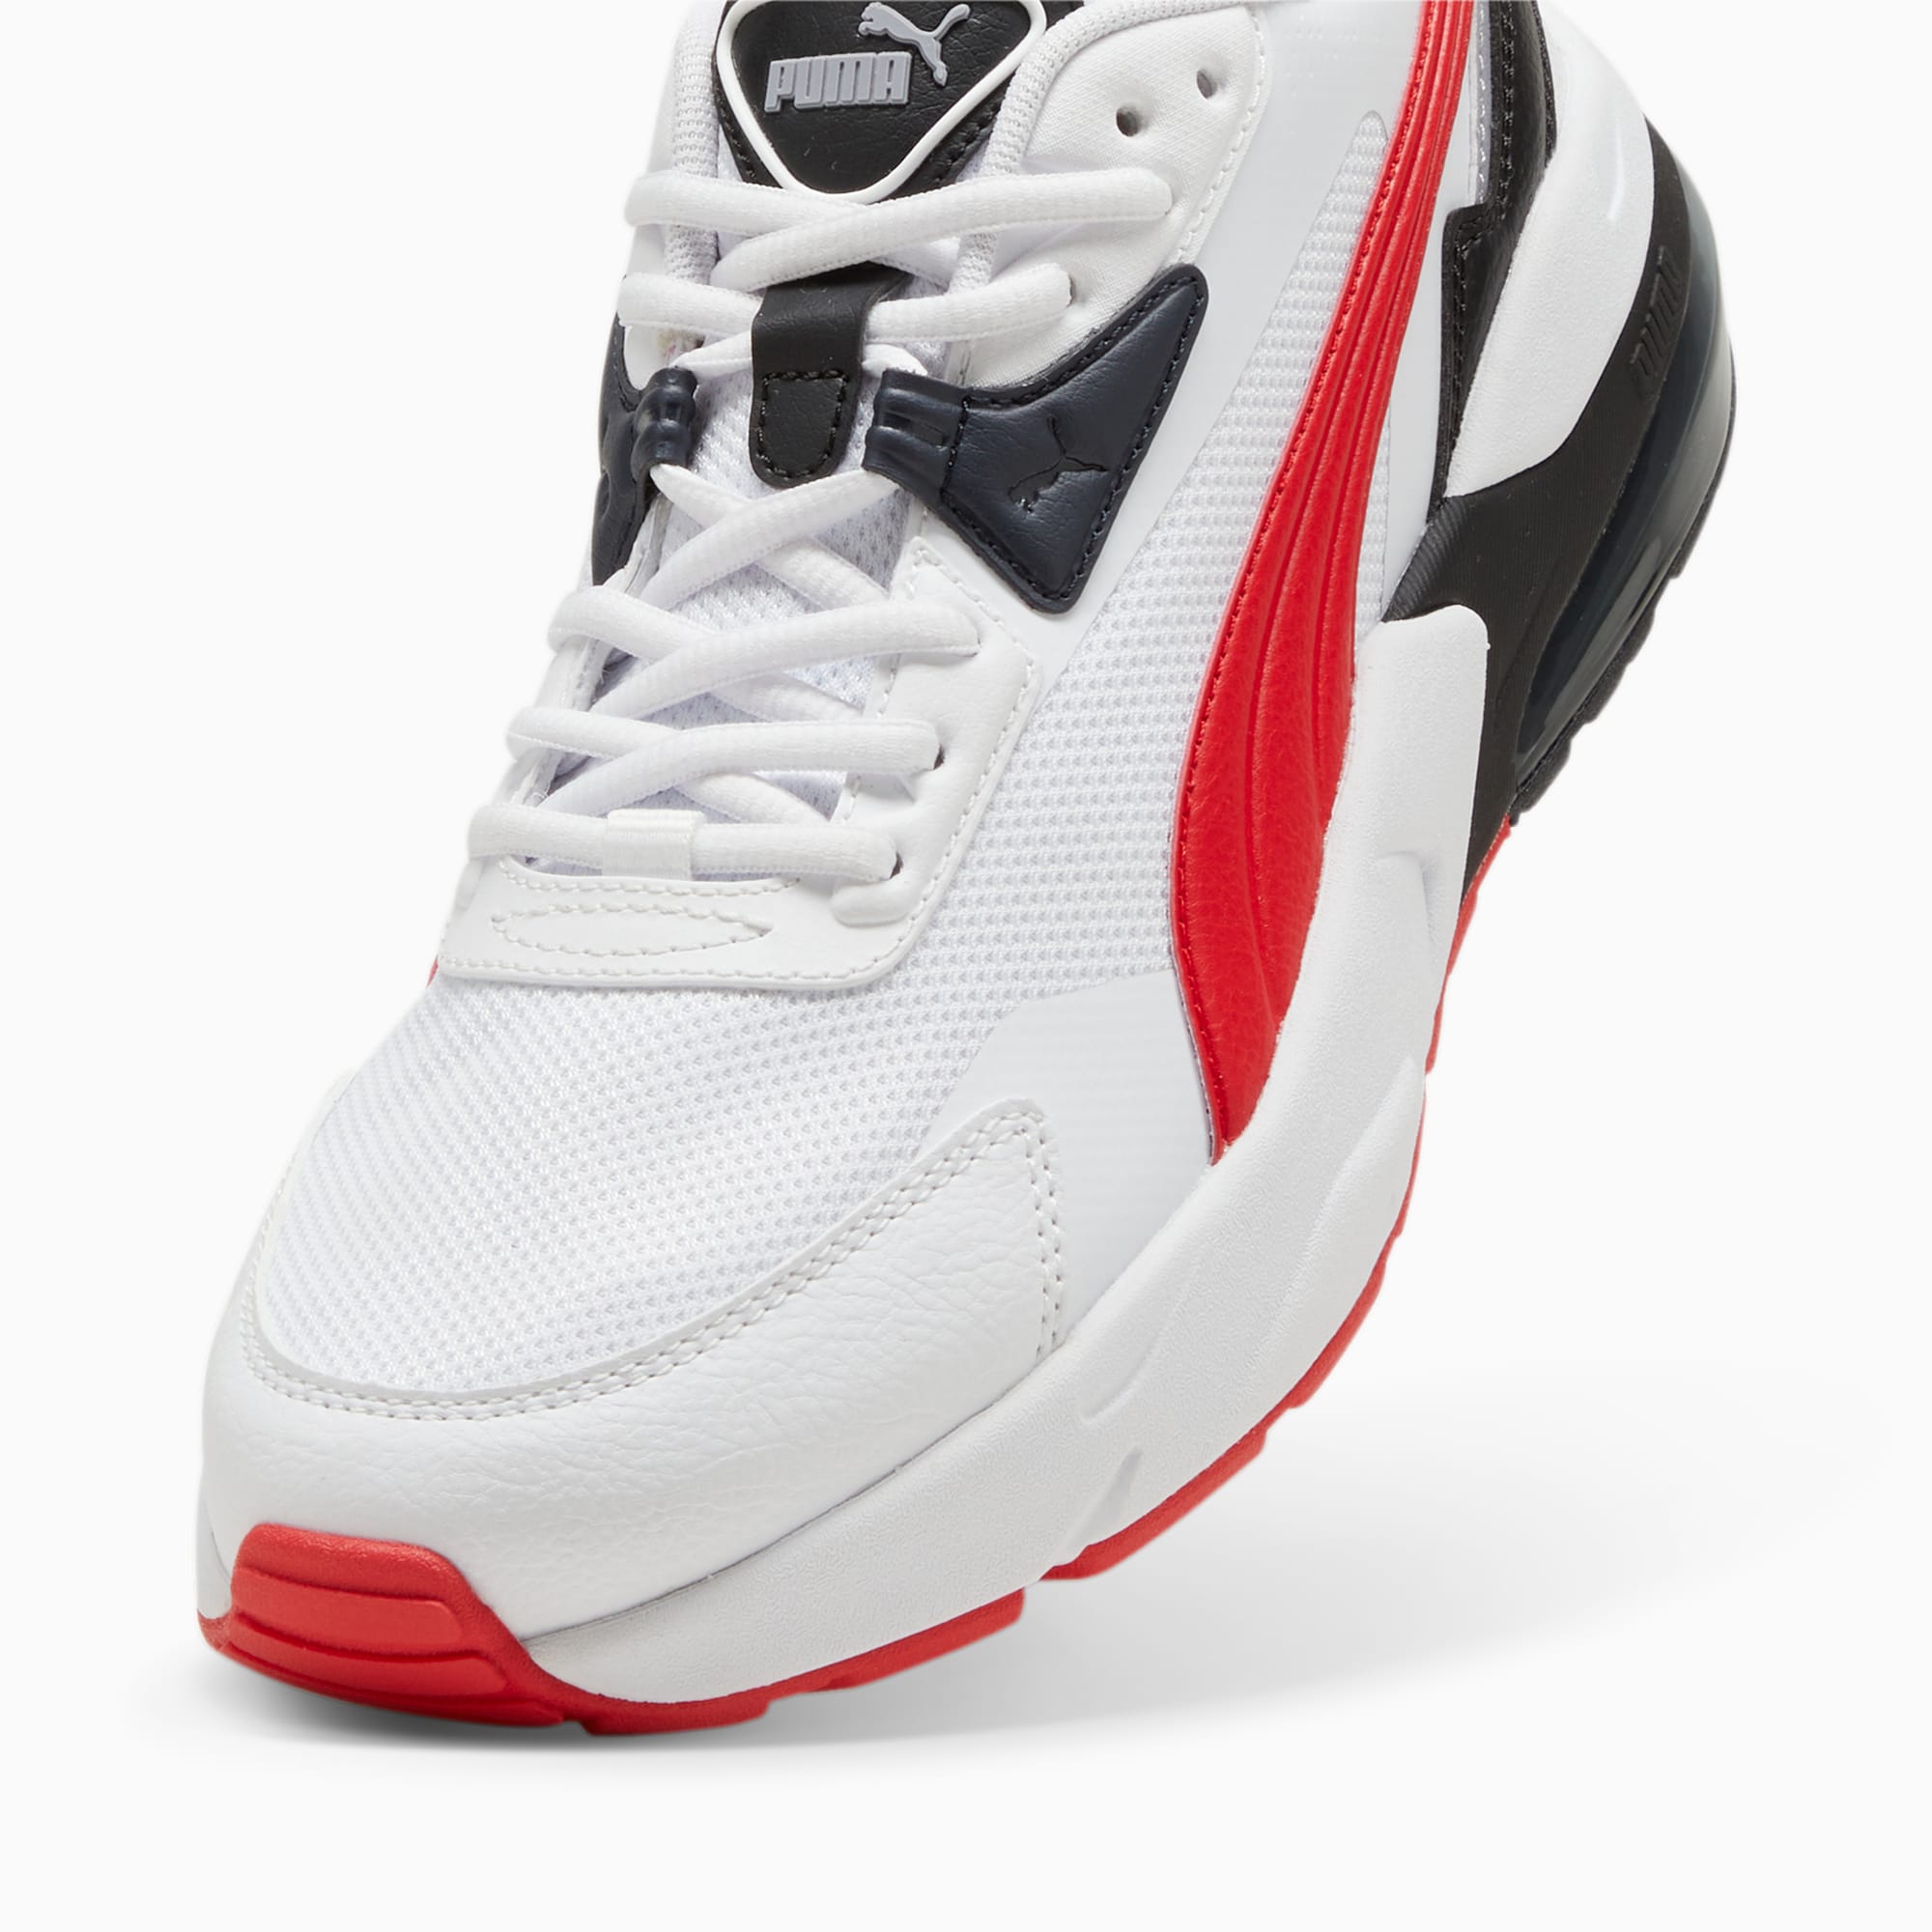 Women's PUMA Vis2K Sneakers, White/For All Time Red/Black, Size 35,5, Shoes